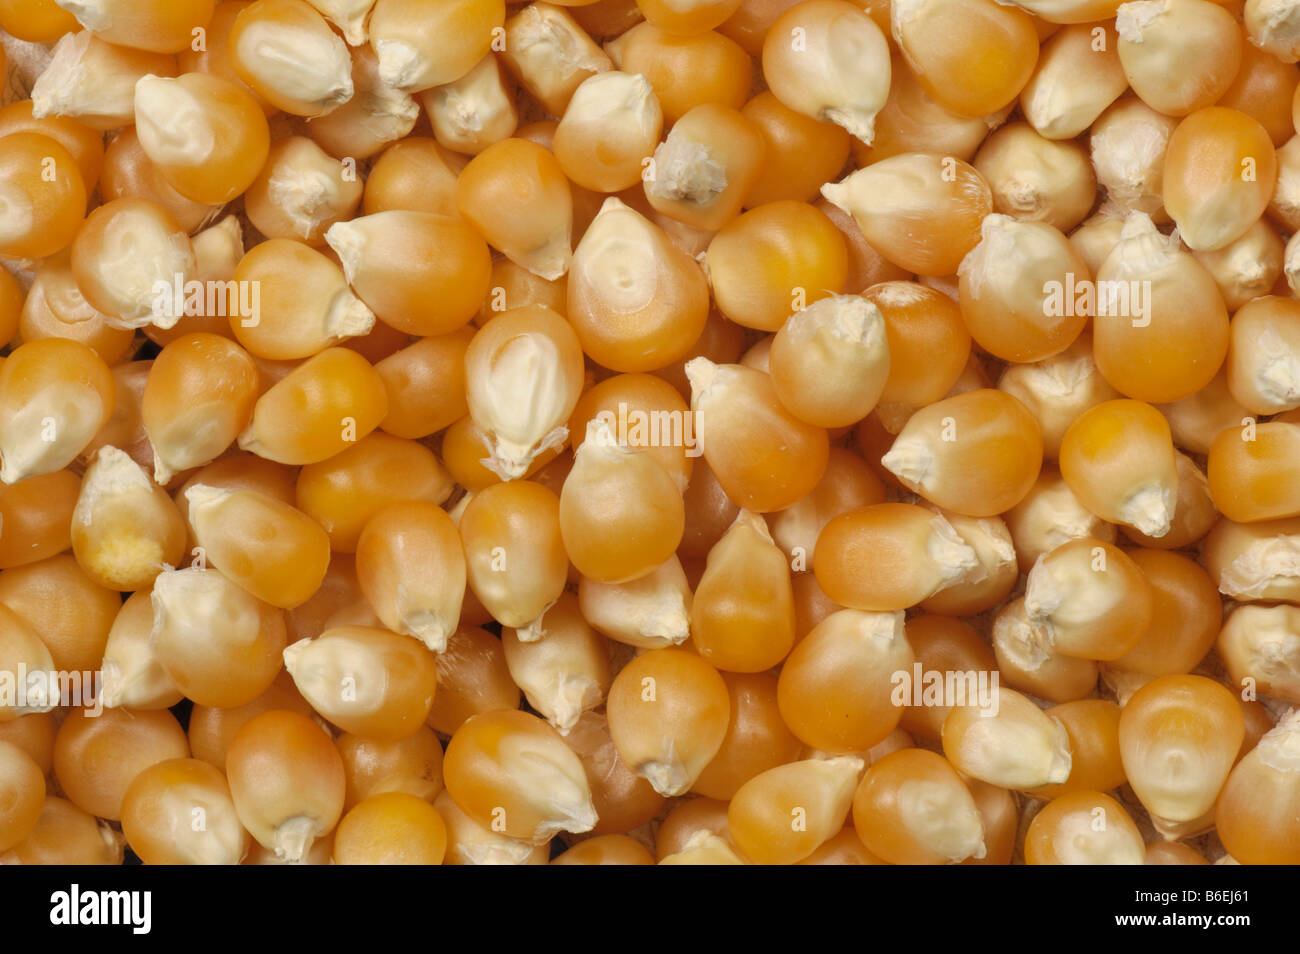 Popcorn or popping corn as sold in health food shops grown in China Stock Photo